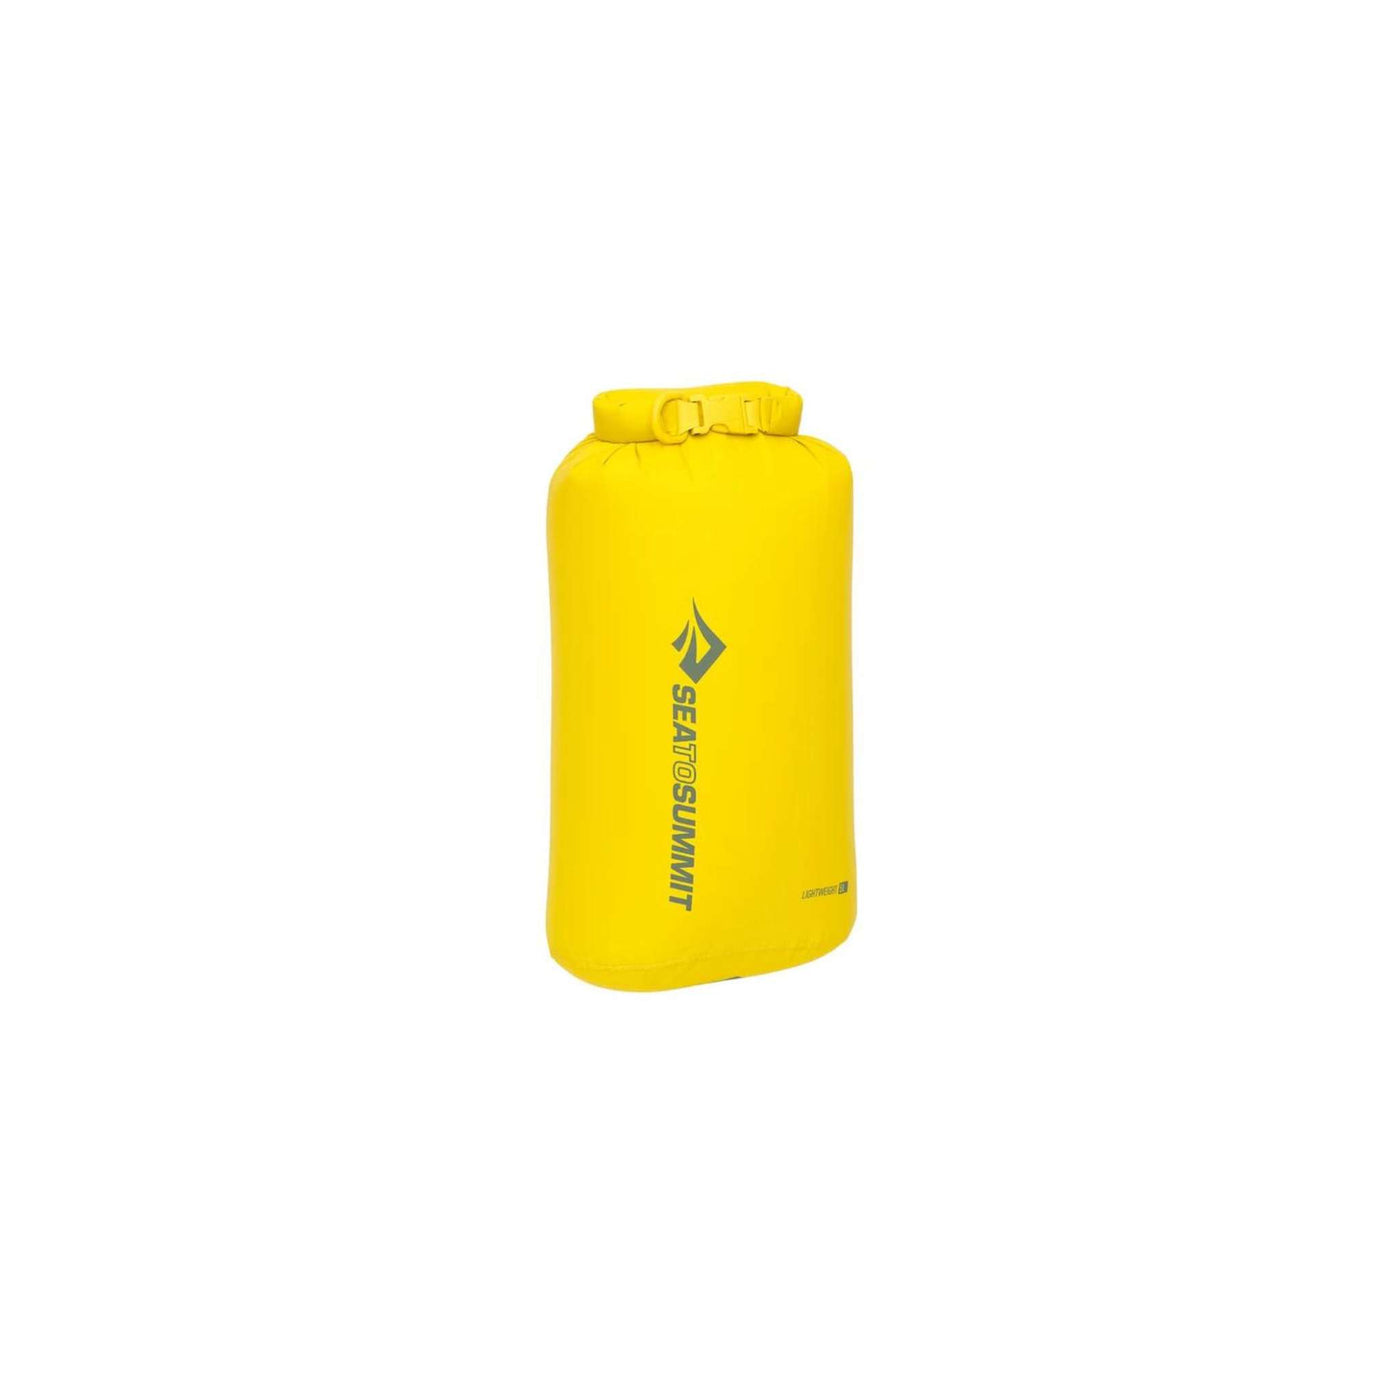 Sea to Summit Lightweight Dry Bag - 5 Litre | Stuff Sacks and Dry Bags | Further Faster Christchurch NZ | #sulphur-yellow